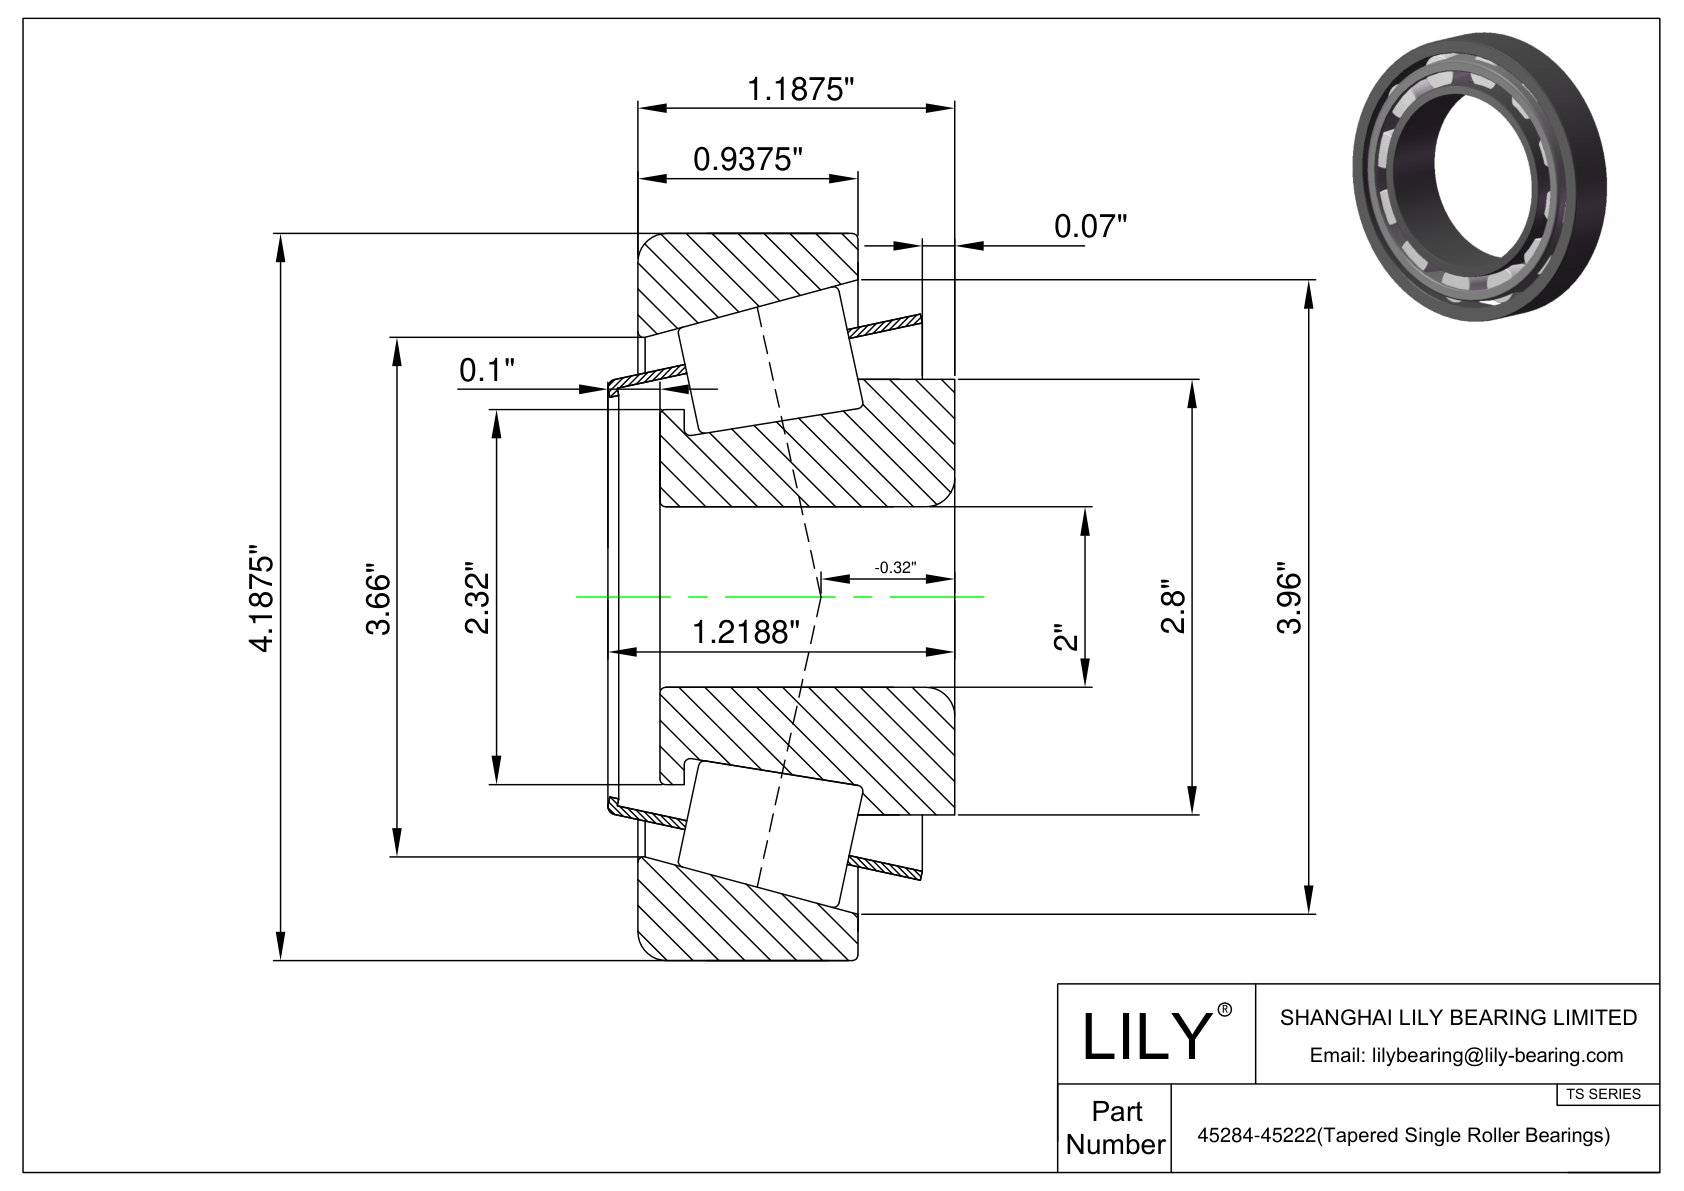 45284-45222 TS (Tapered Single Roller Bearings) (Imperial) cad drawing